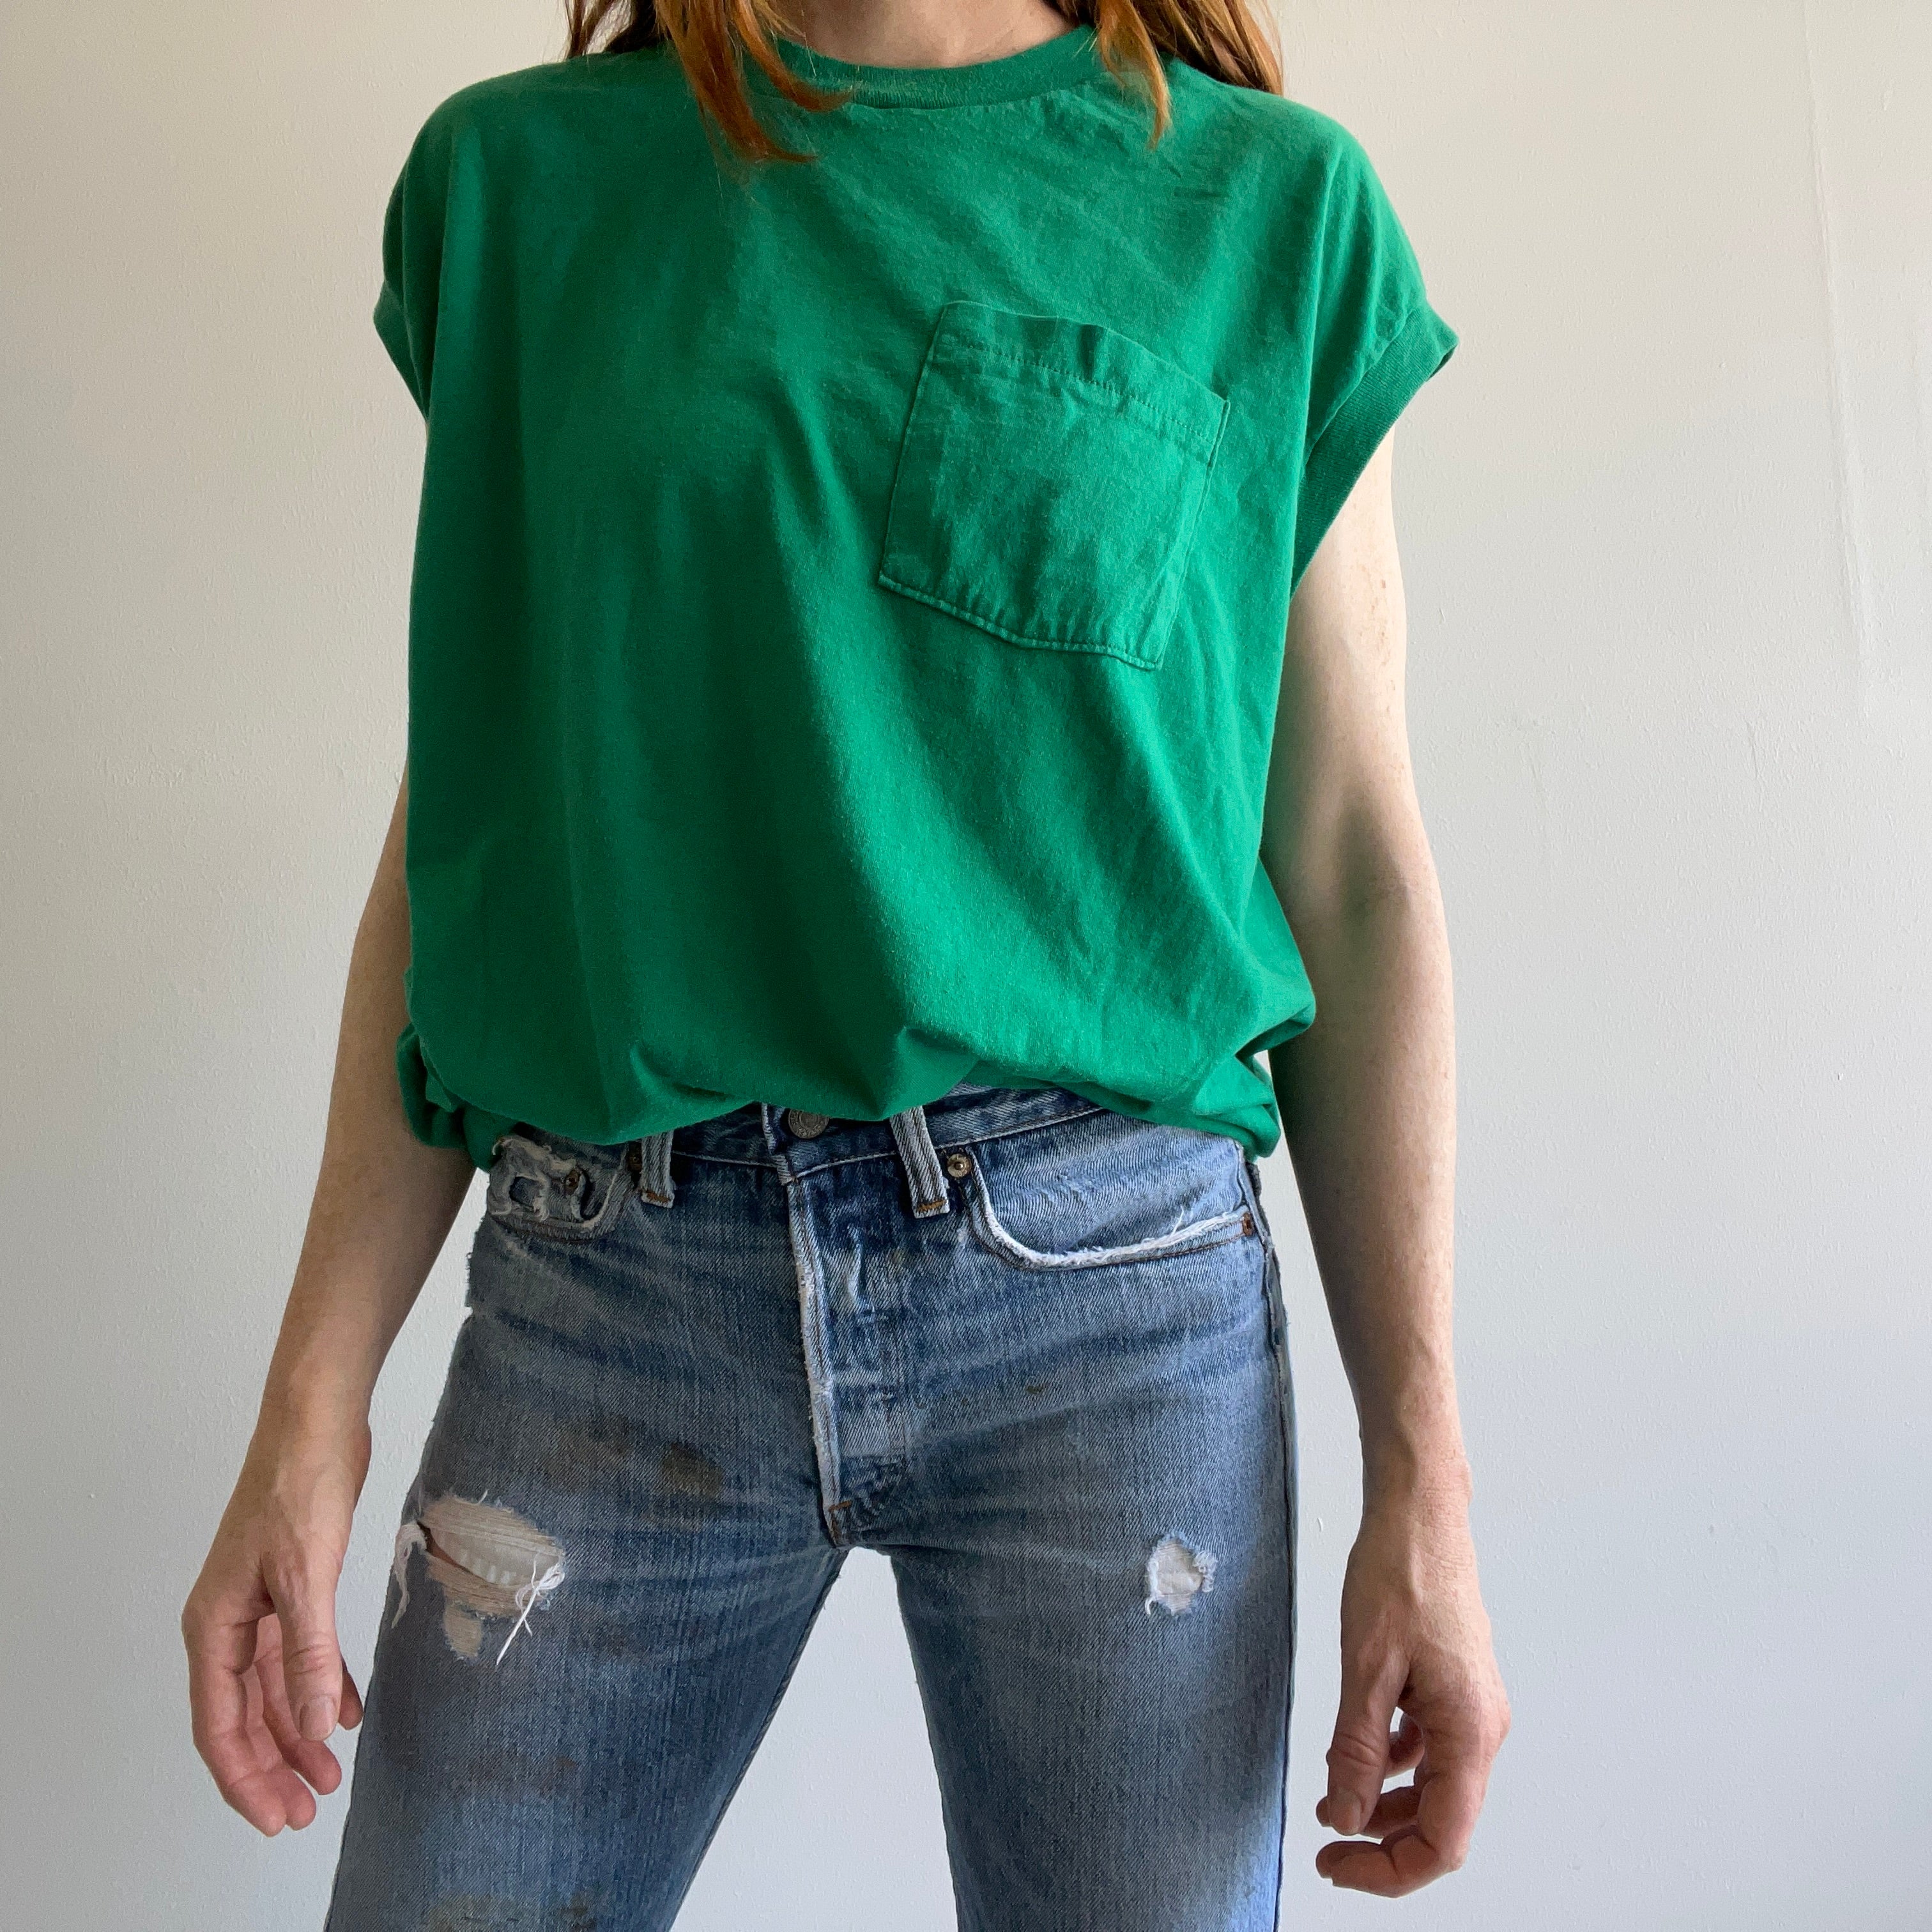 1980s Kelly Green Muscle Tank with a Selvedge Pocket